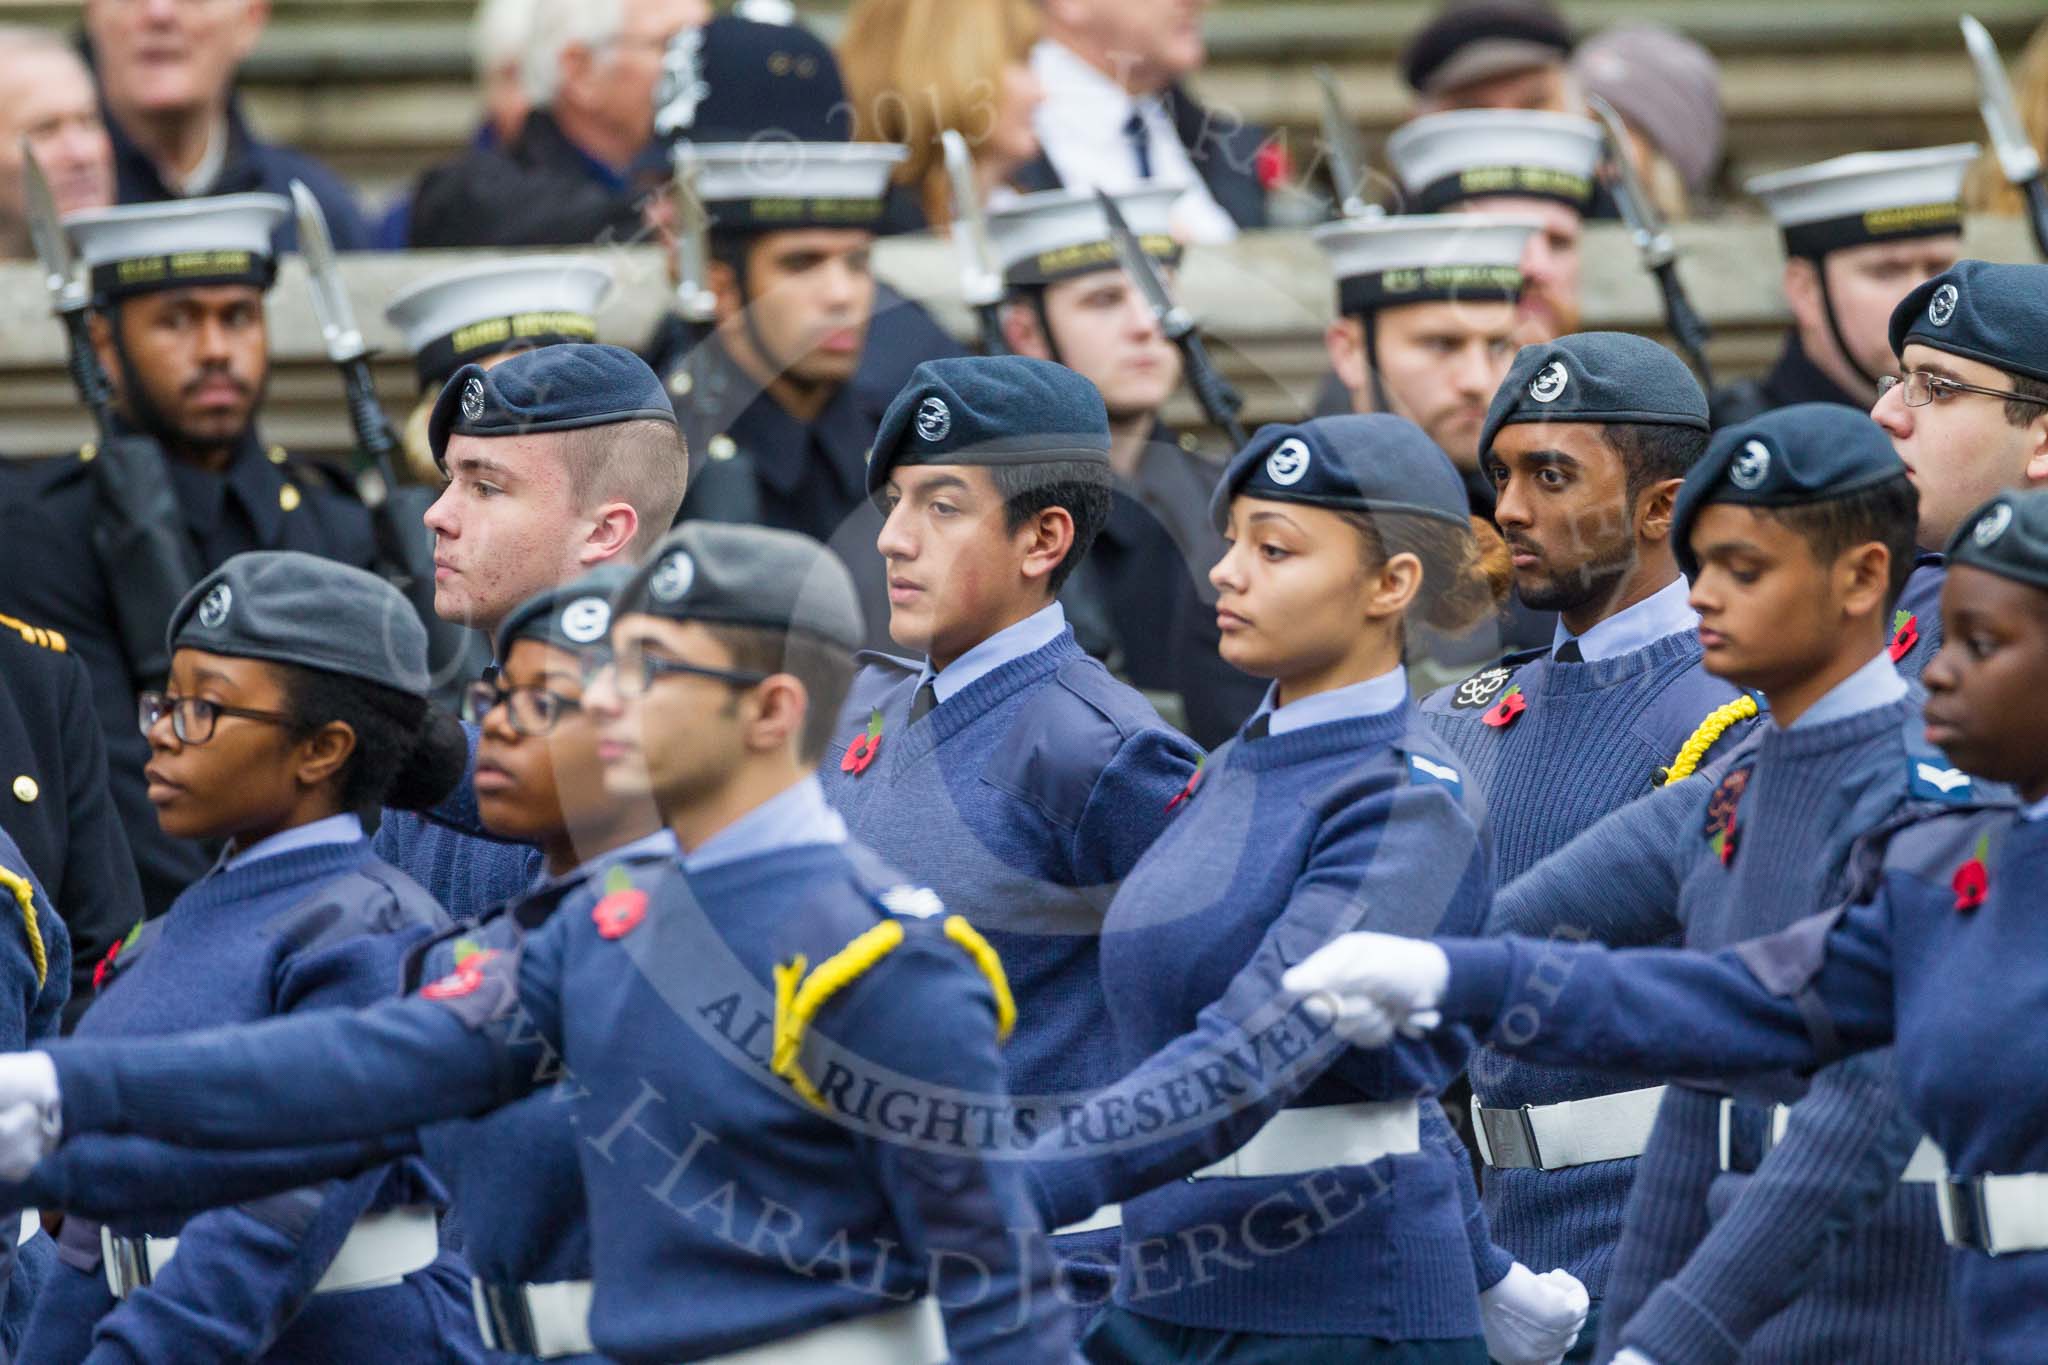 Remembrance Sunday at the Cenotaph 2015: Group M49, Air Training Corps.
Cenotaph, Whitehall, London SW1,
London,
Greater London,
United Kingdom,
on 08 November 2015 at 12:20, image #1716